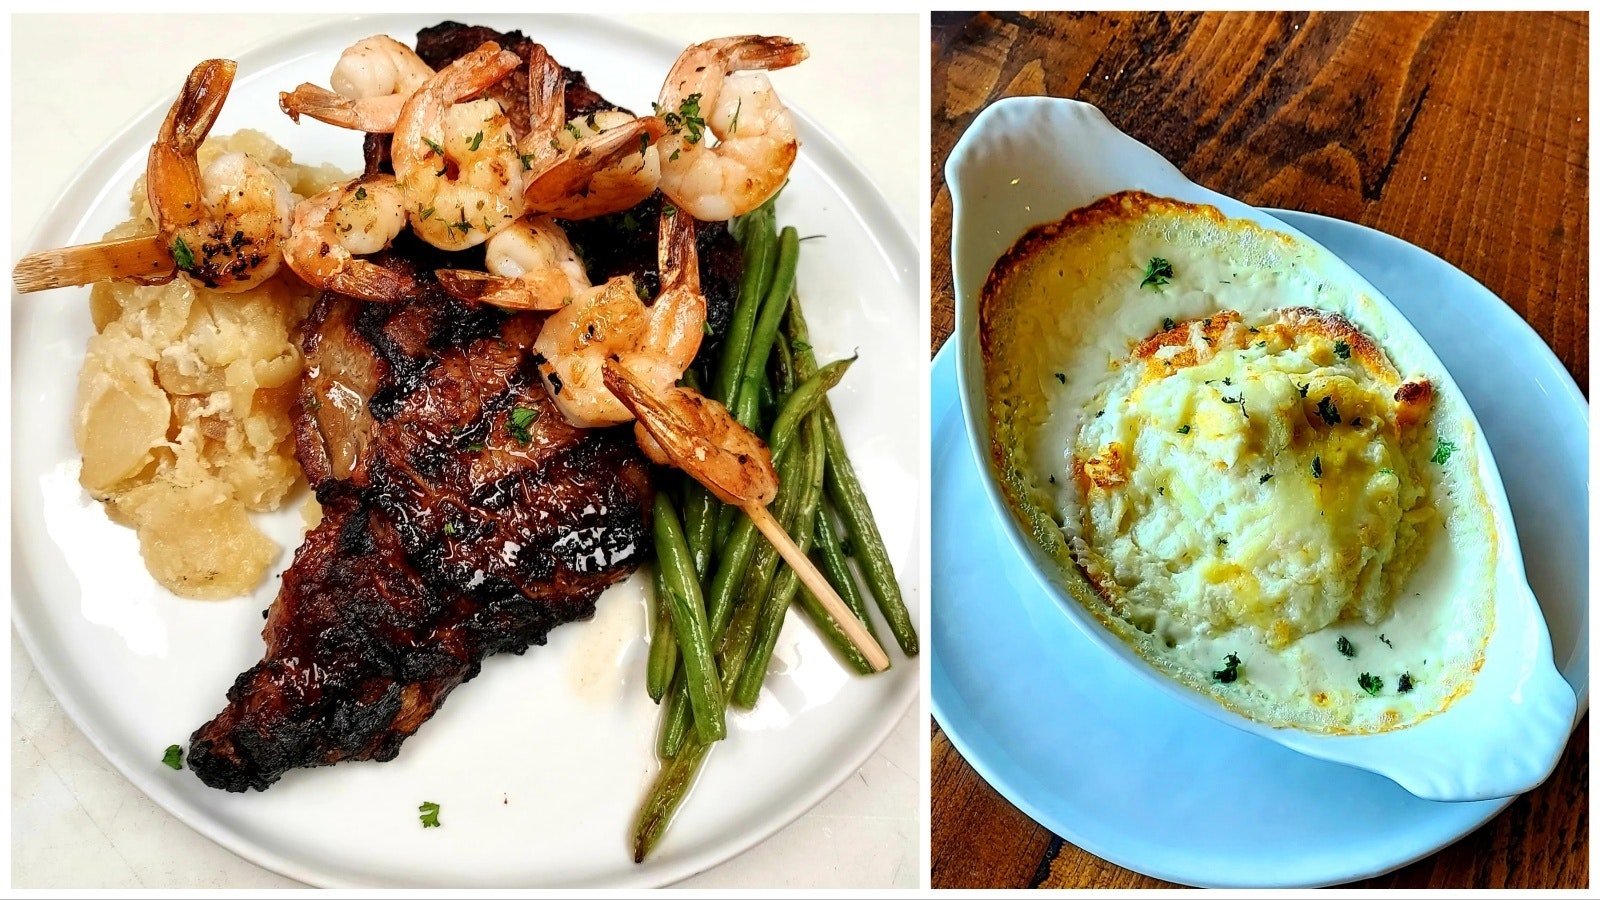 Double baked cheese souffle and Ribeye.